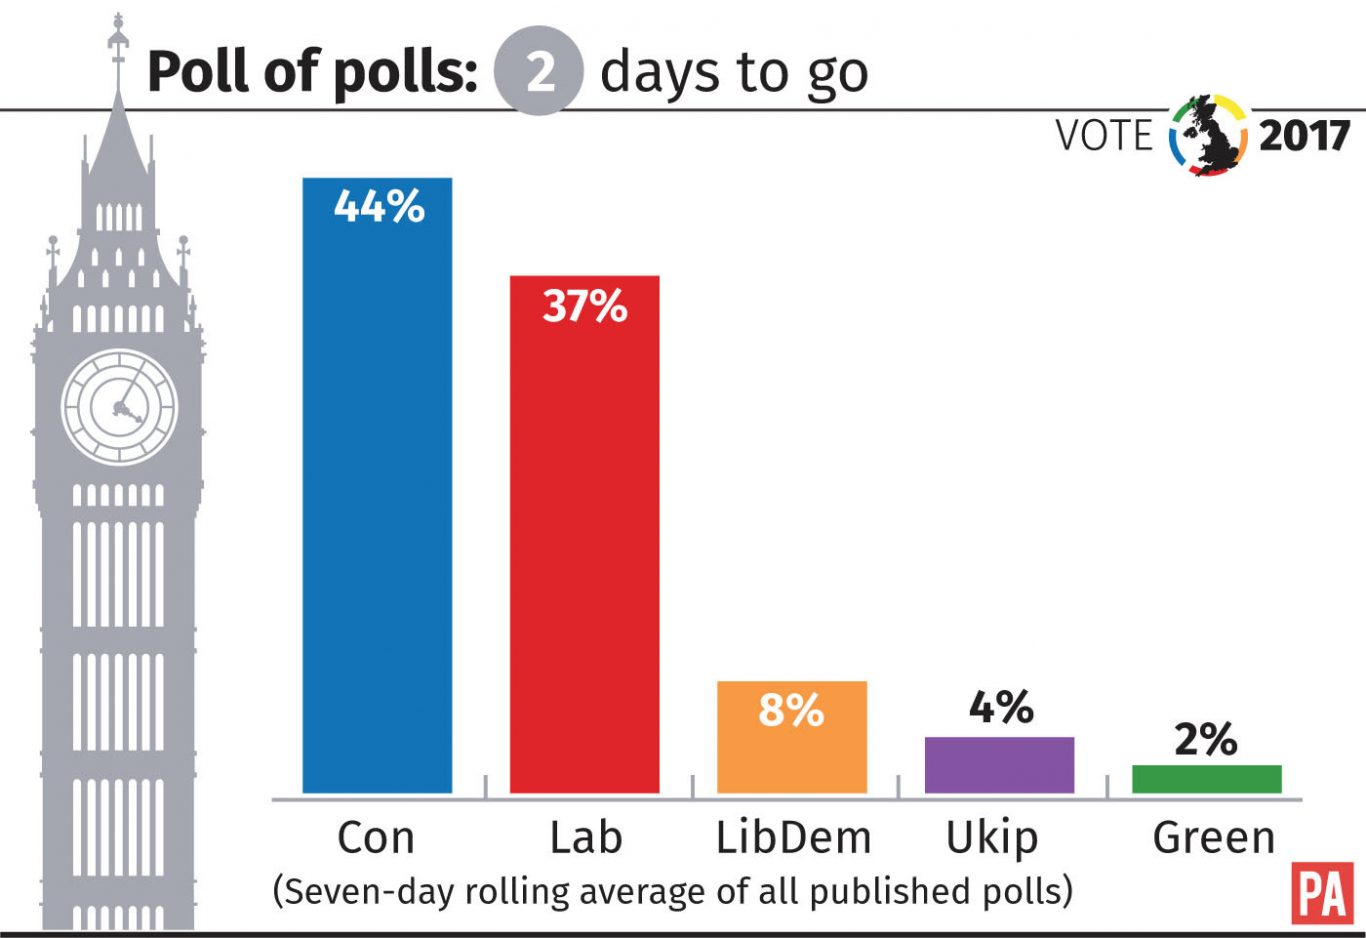 Poll of polls with two days to go